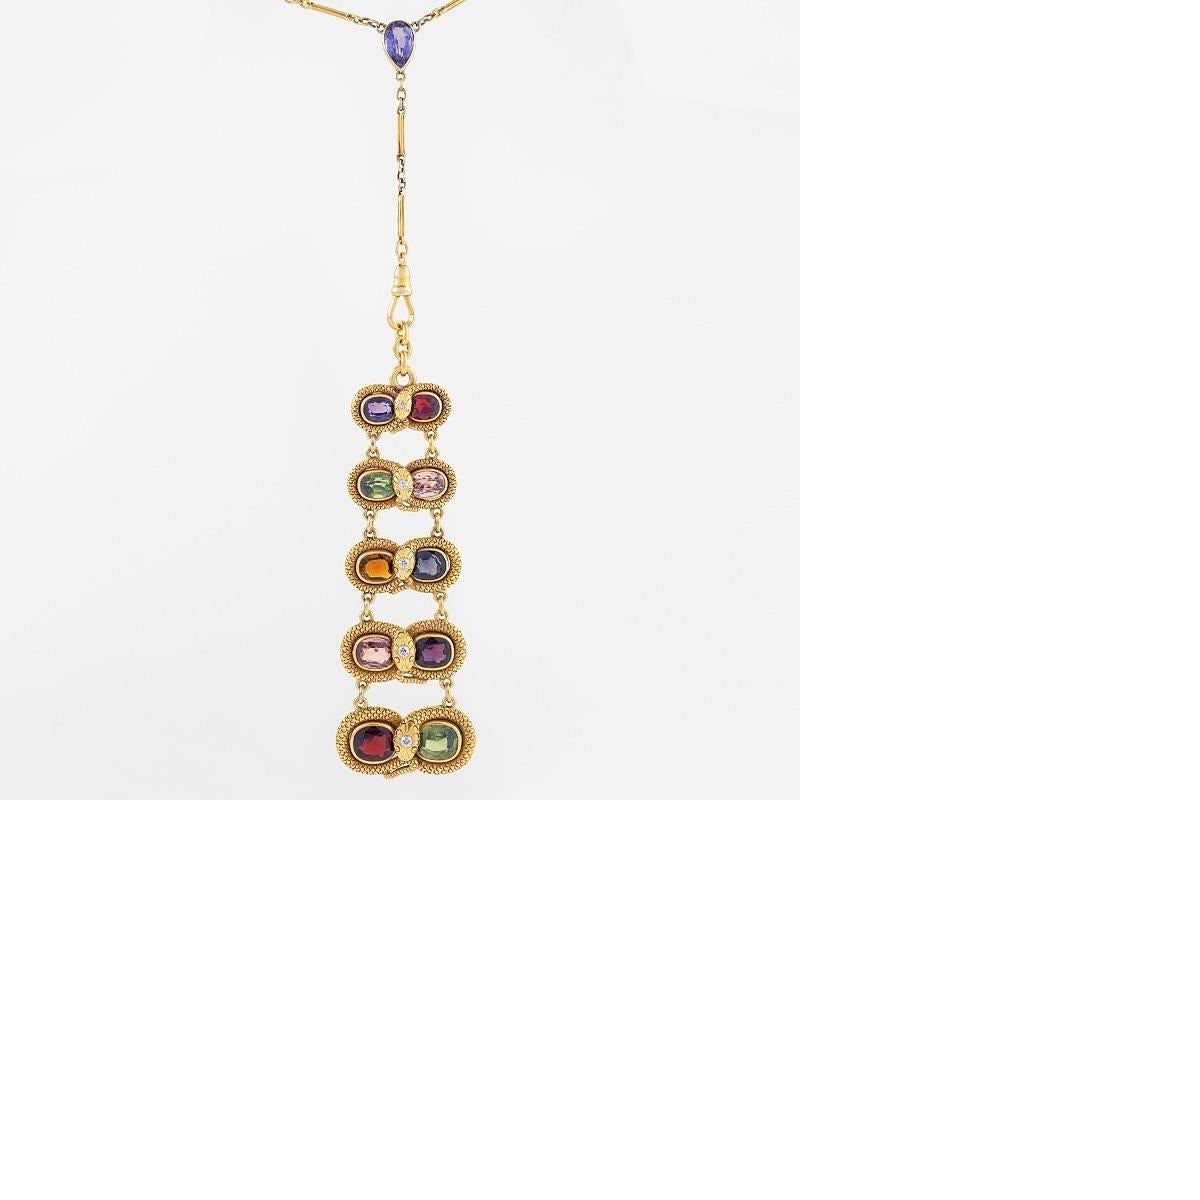 A 14 karat gold and colored stone-studded chain featuring a 10 stone pendant with a snake motif. This turn-of-the-20th-century pendant is comprised of five horizontal links that graduate in size and are connected with flexible joints. Each of the